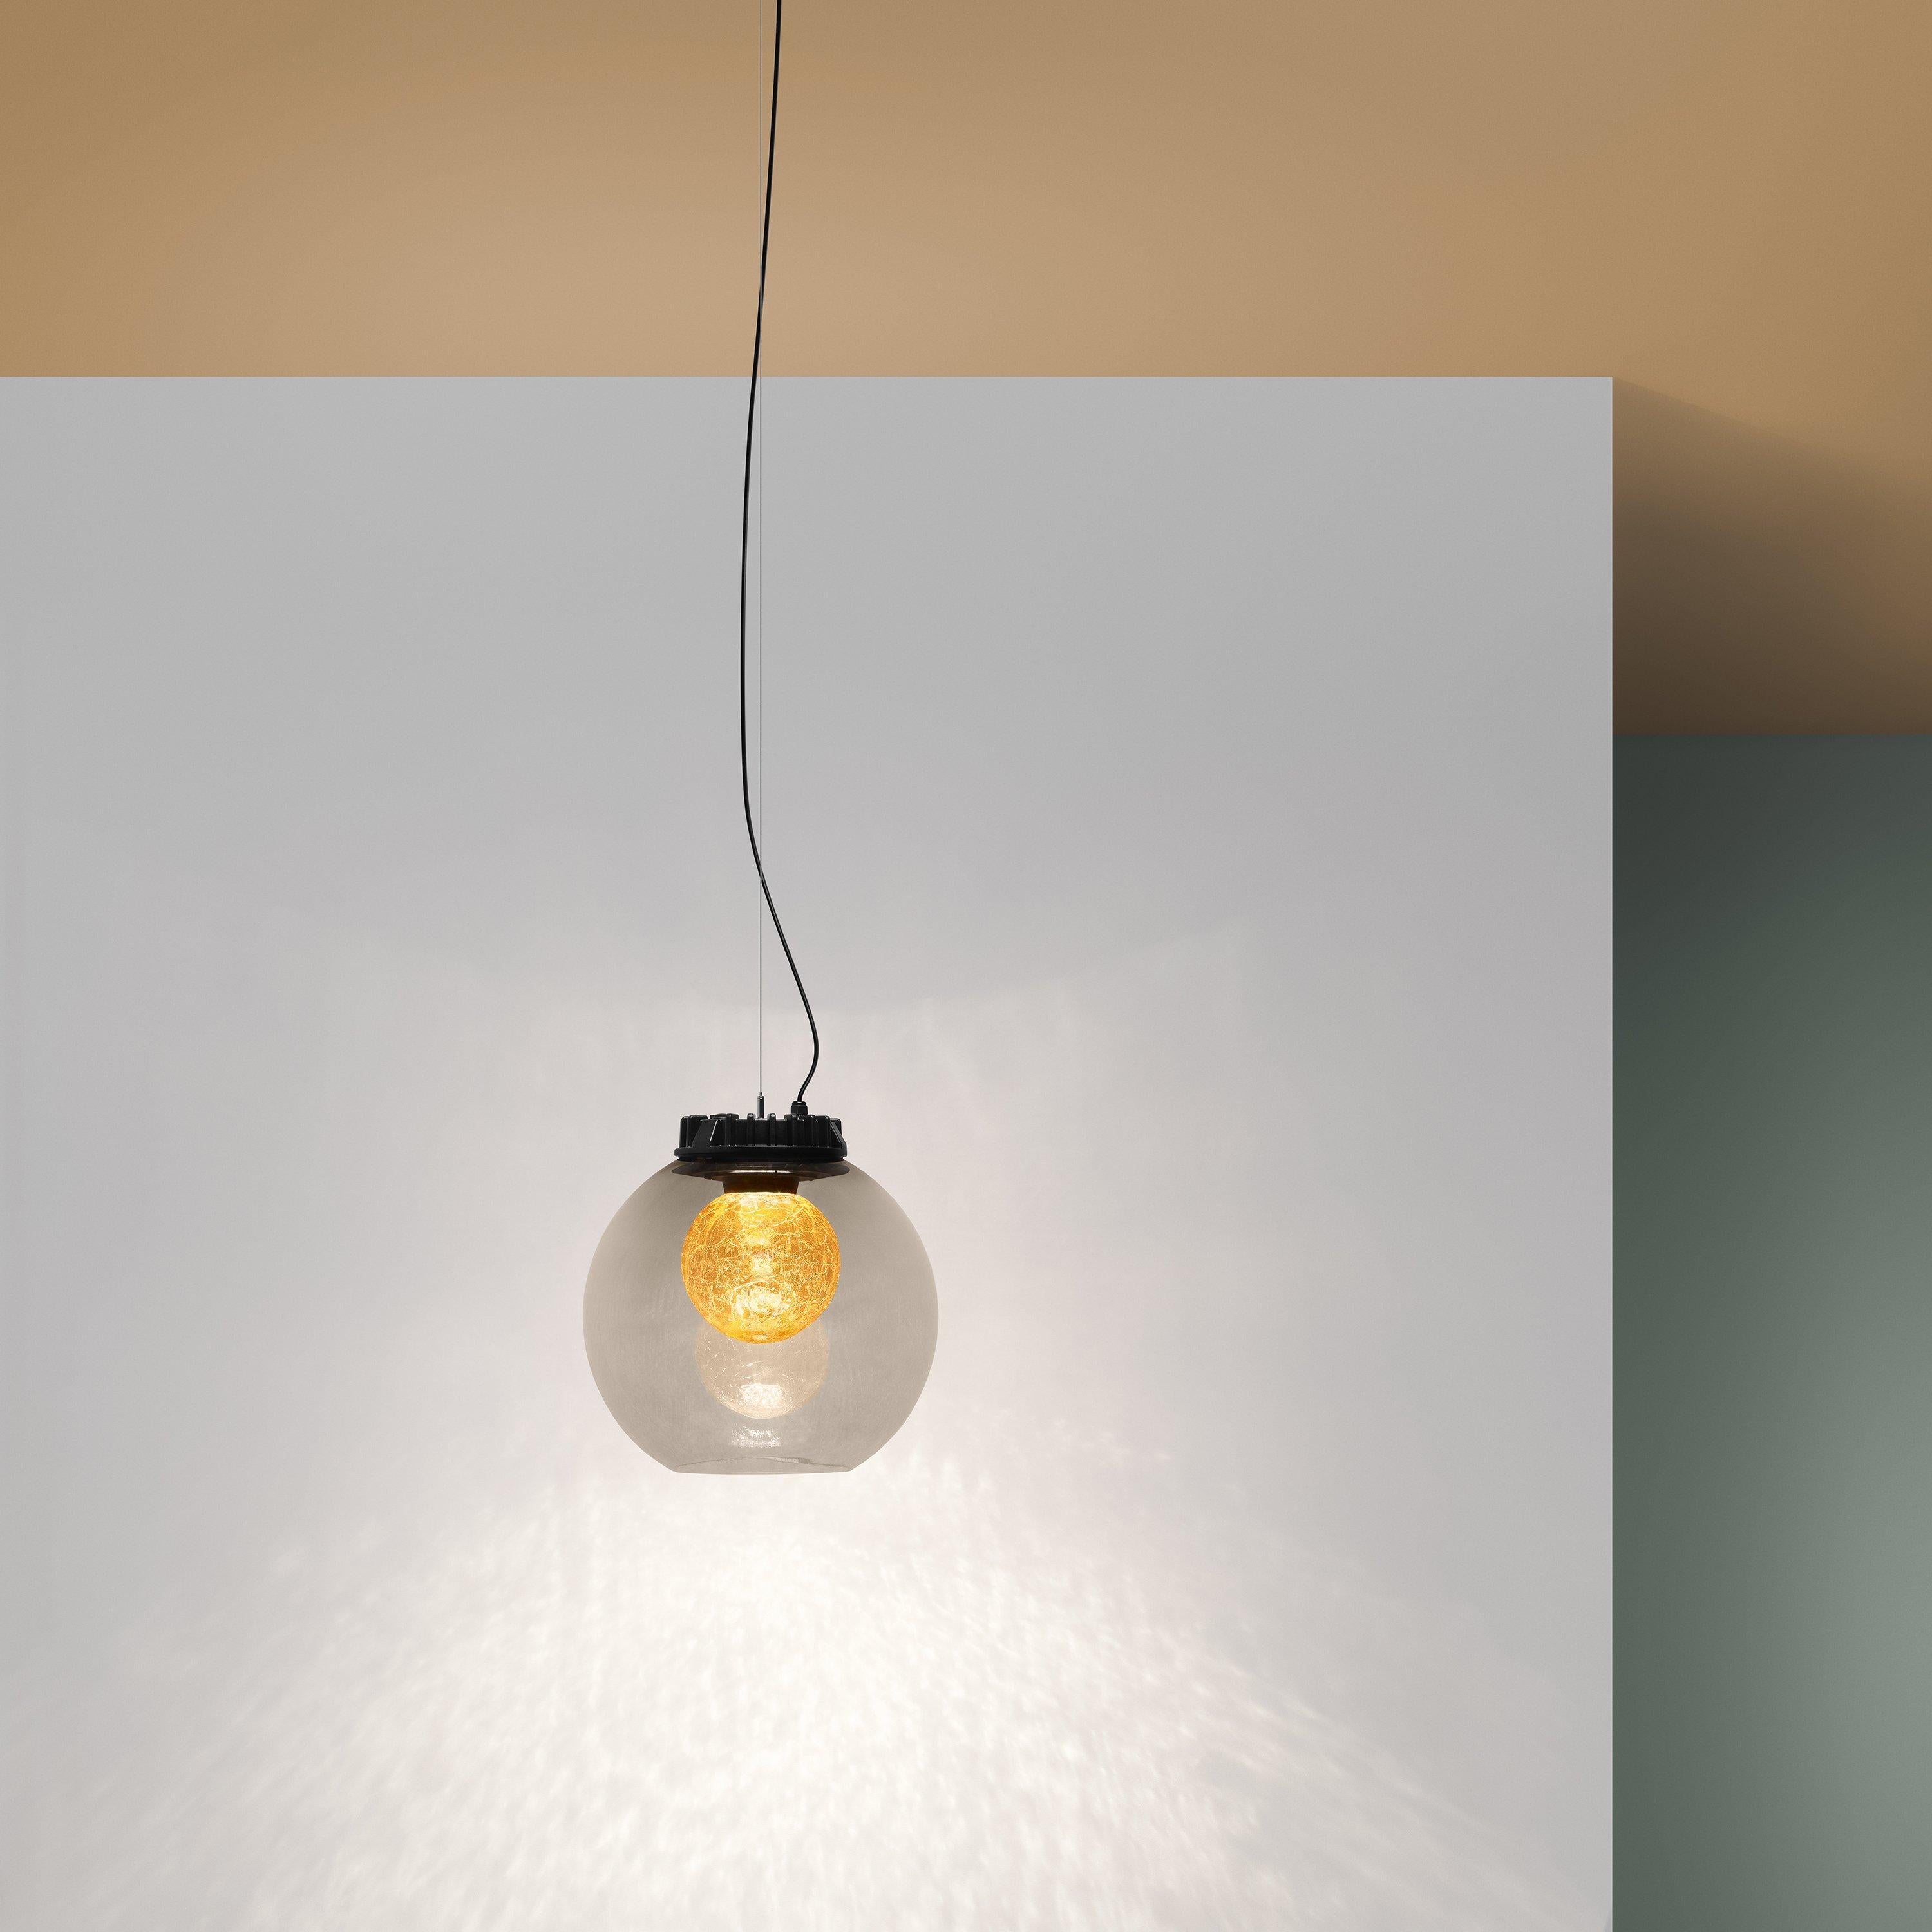 Designer Thomas Bernstrand took his lofty ambitions with the City pendant and lightened its profile by fitting it with a acrylic shade. That doesn’t mean the City Globe pendant with a opal outer globe, has lost any of its industrial chic appeal, as